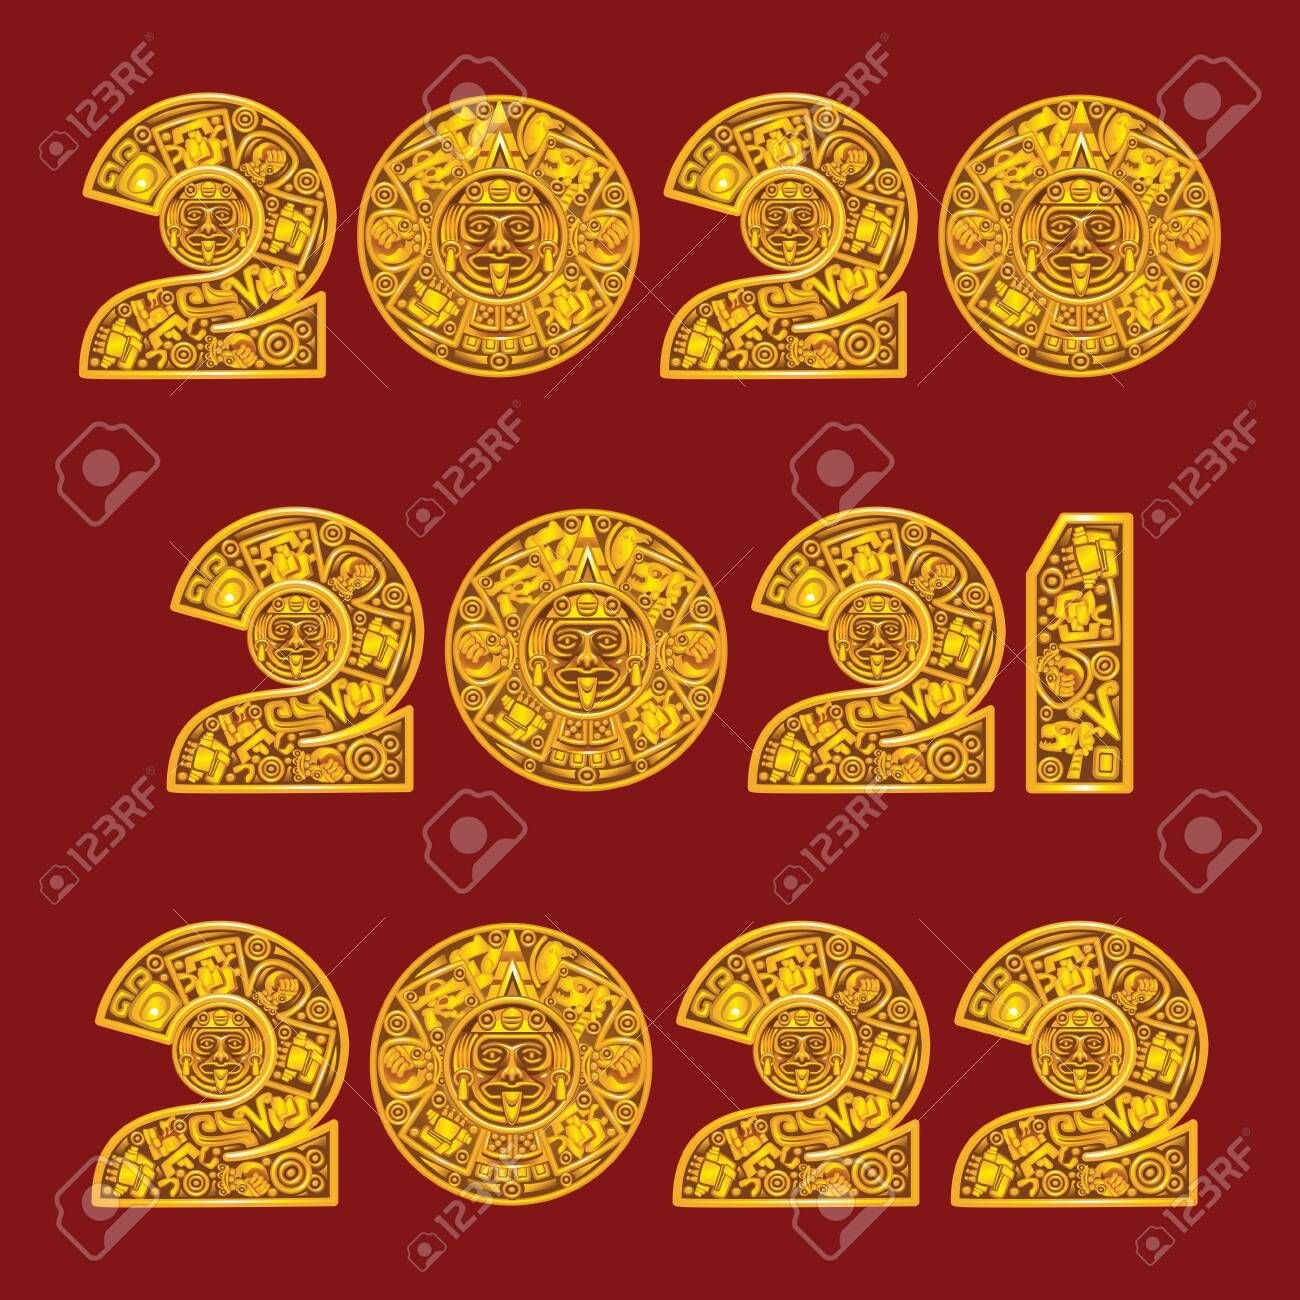 2020, 2021 And 2022 In The Style Of The Mayan Calendar